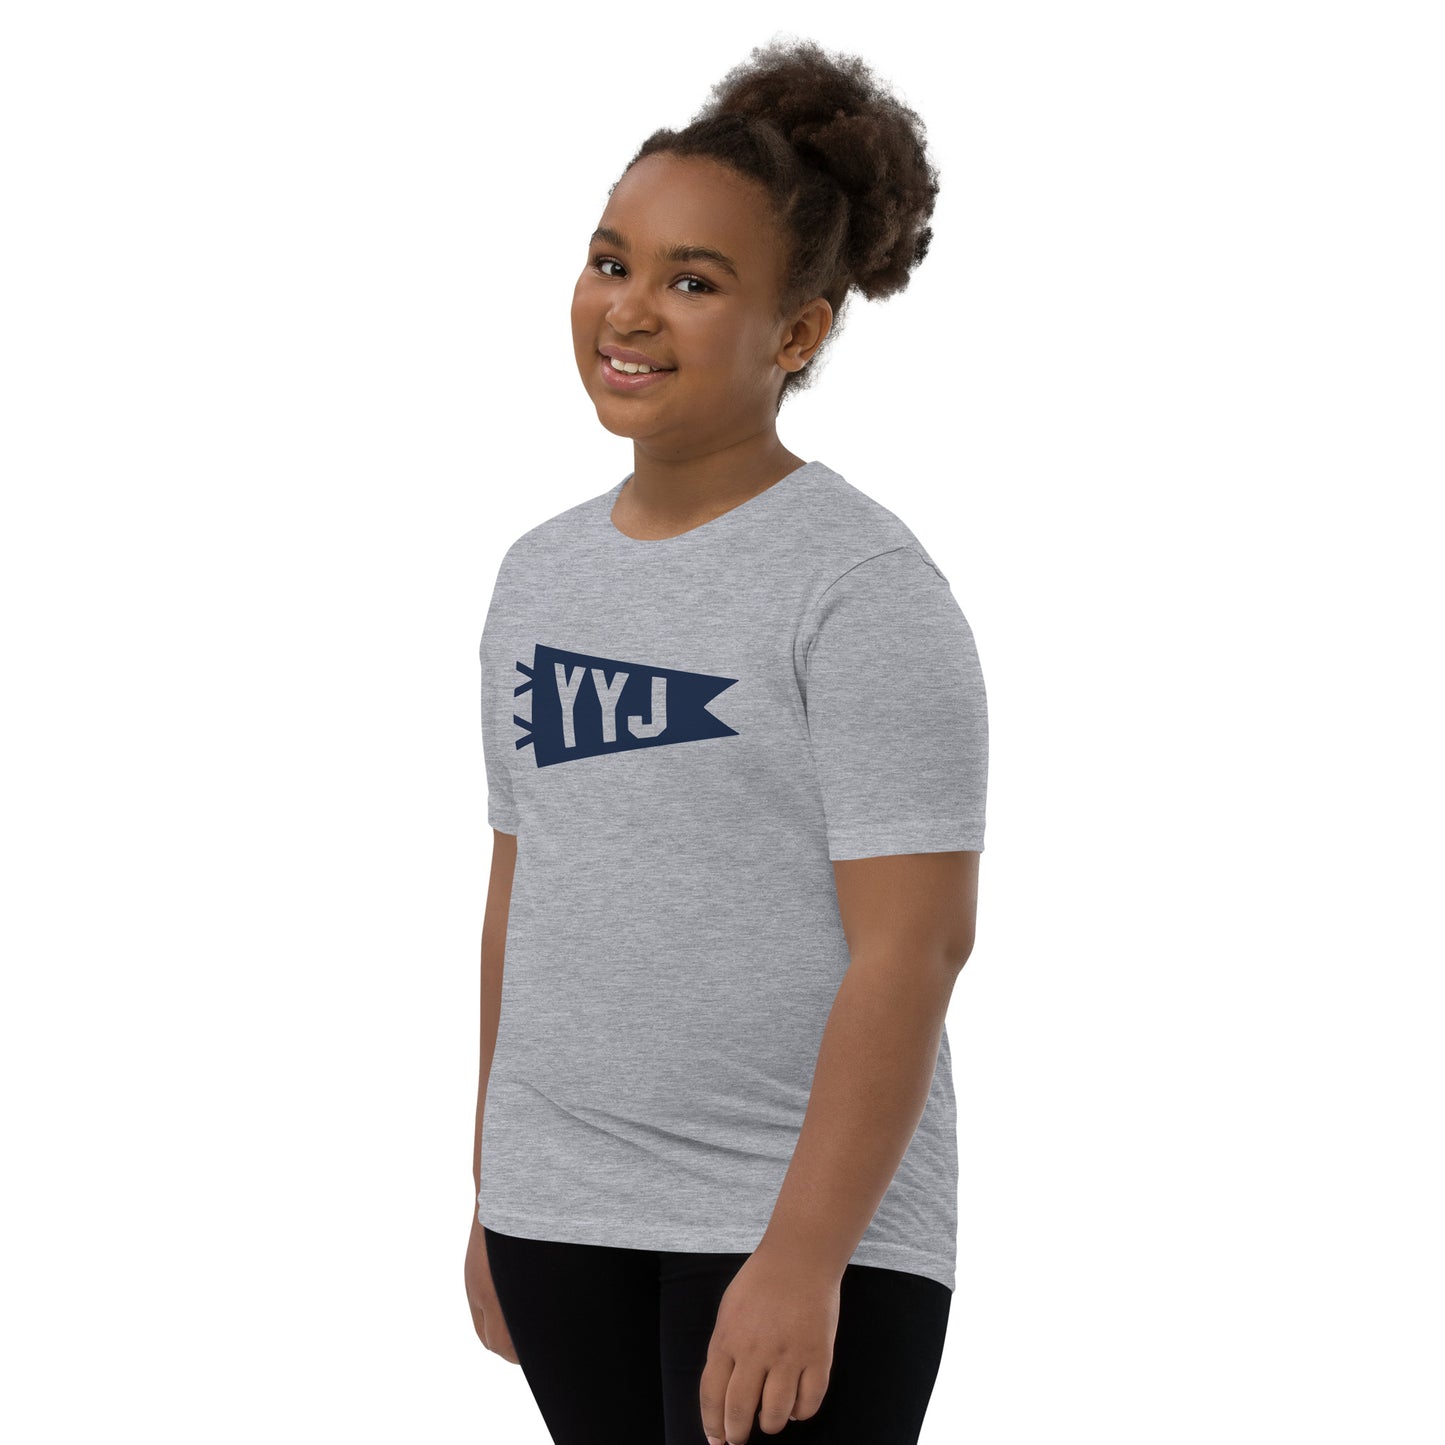 Kid's Airport Code Tee - Navy Blue Graphic • YYJ Victoria • YHM Designs - Image 04